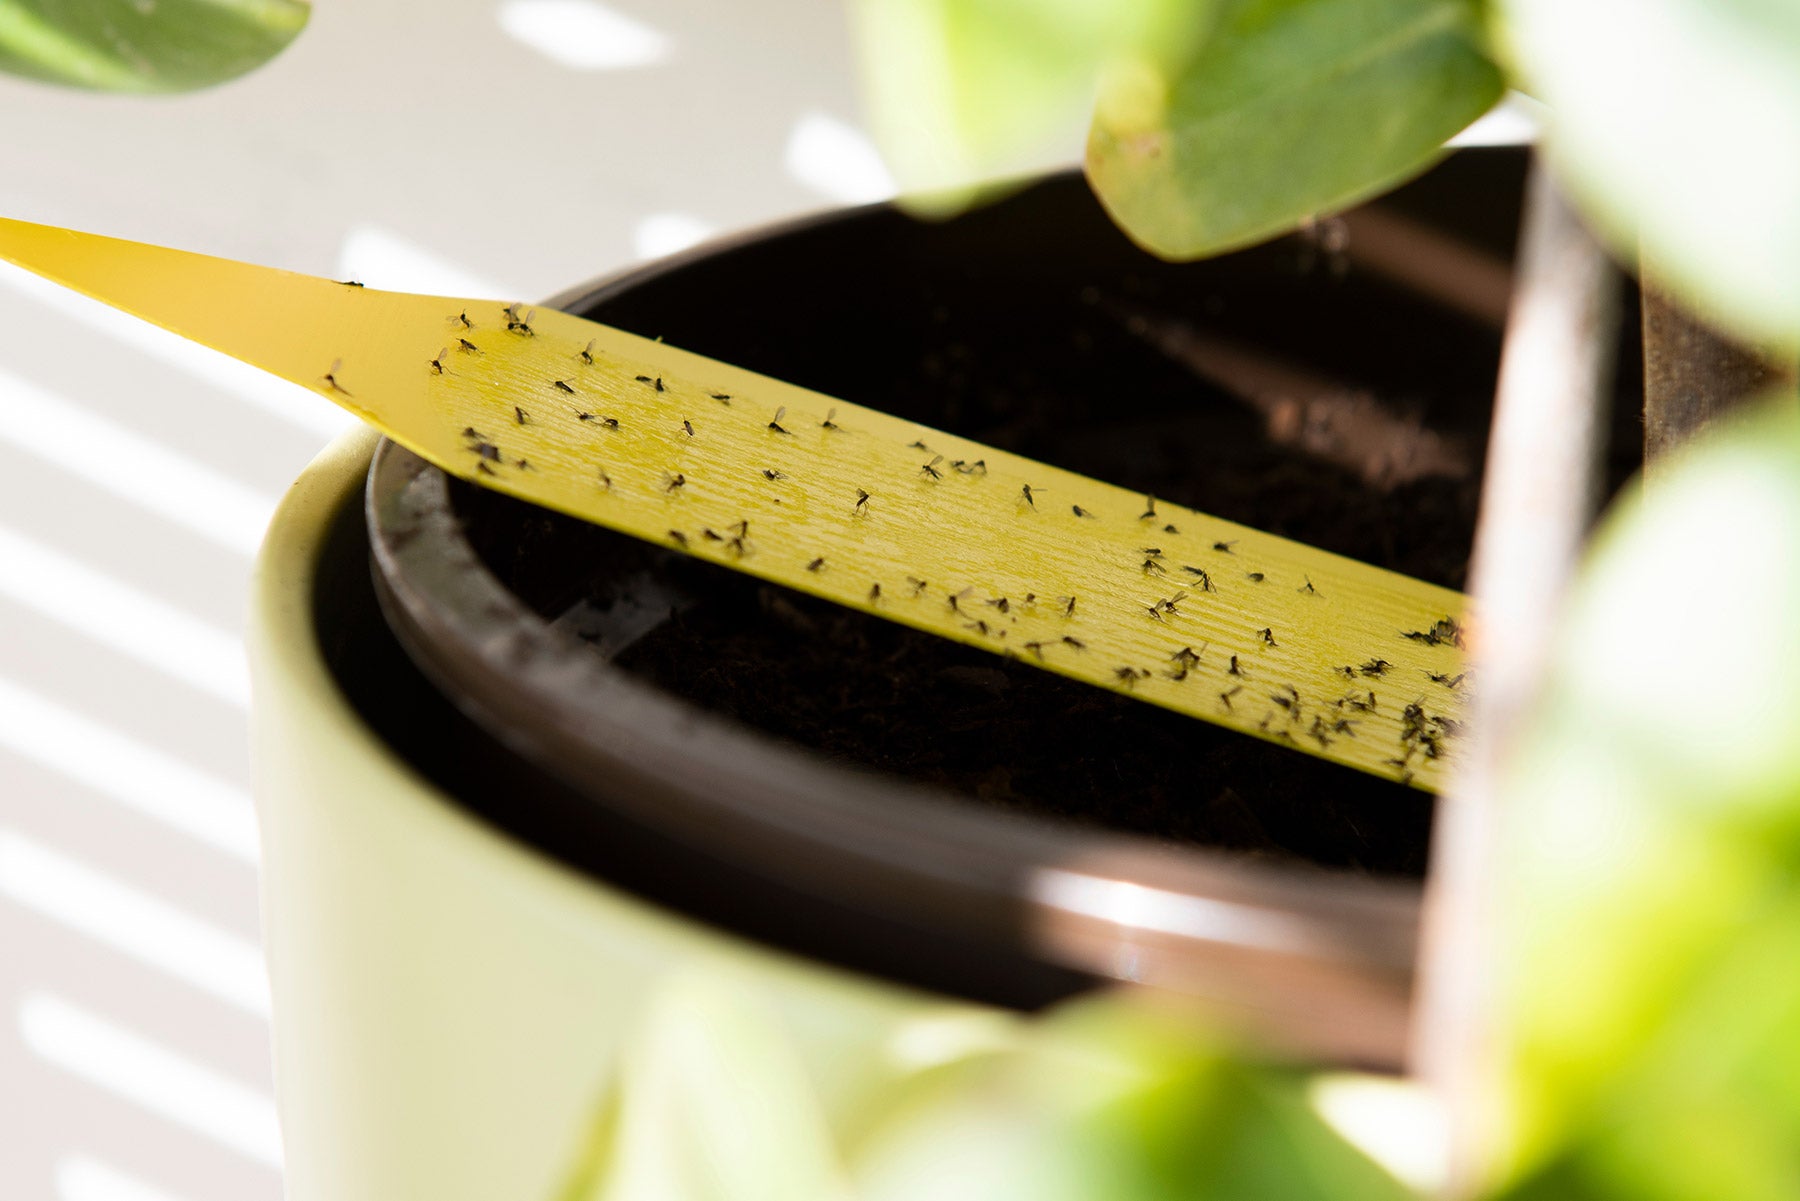 How to get rid of fungus gnats on plants - Los Angeles Times